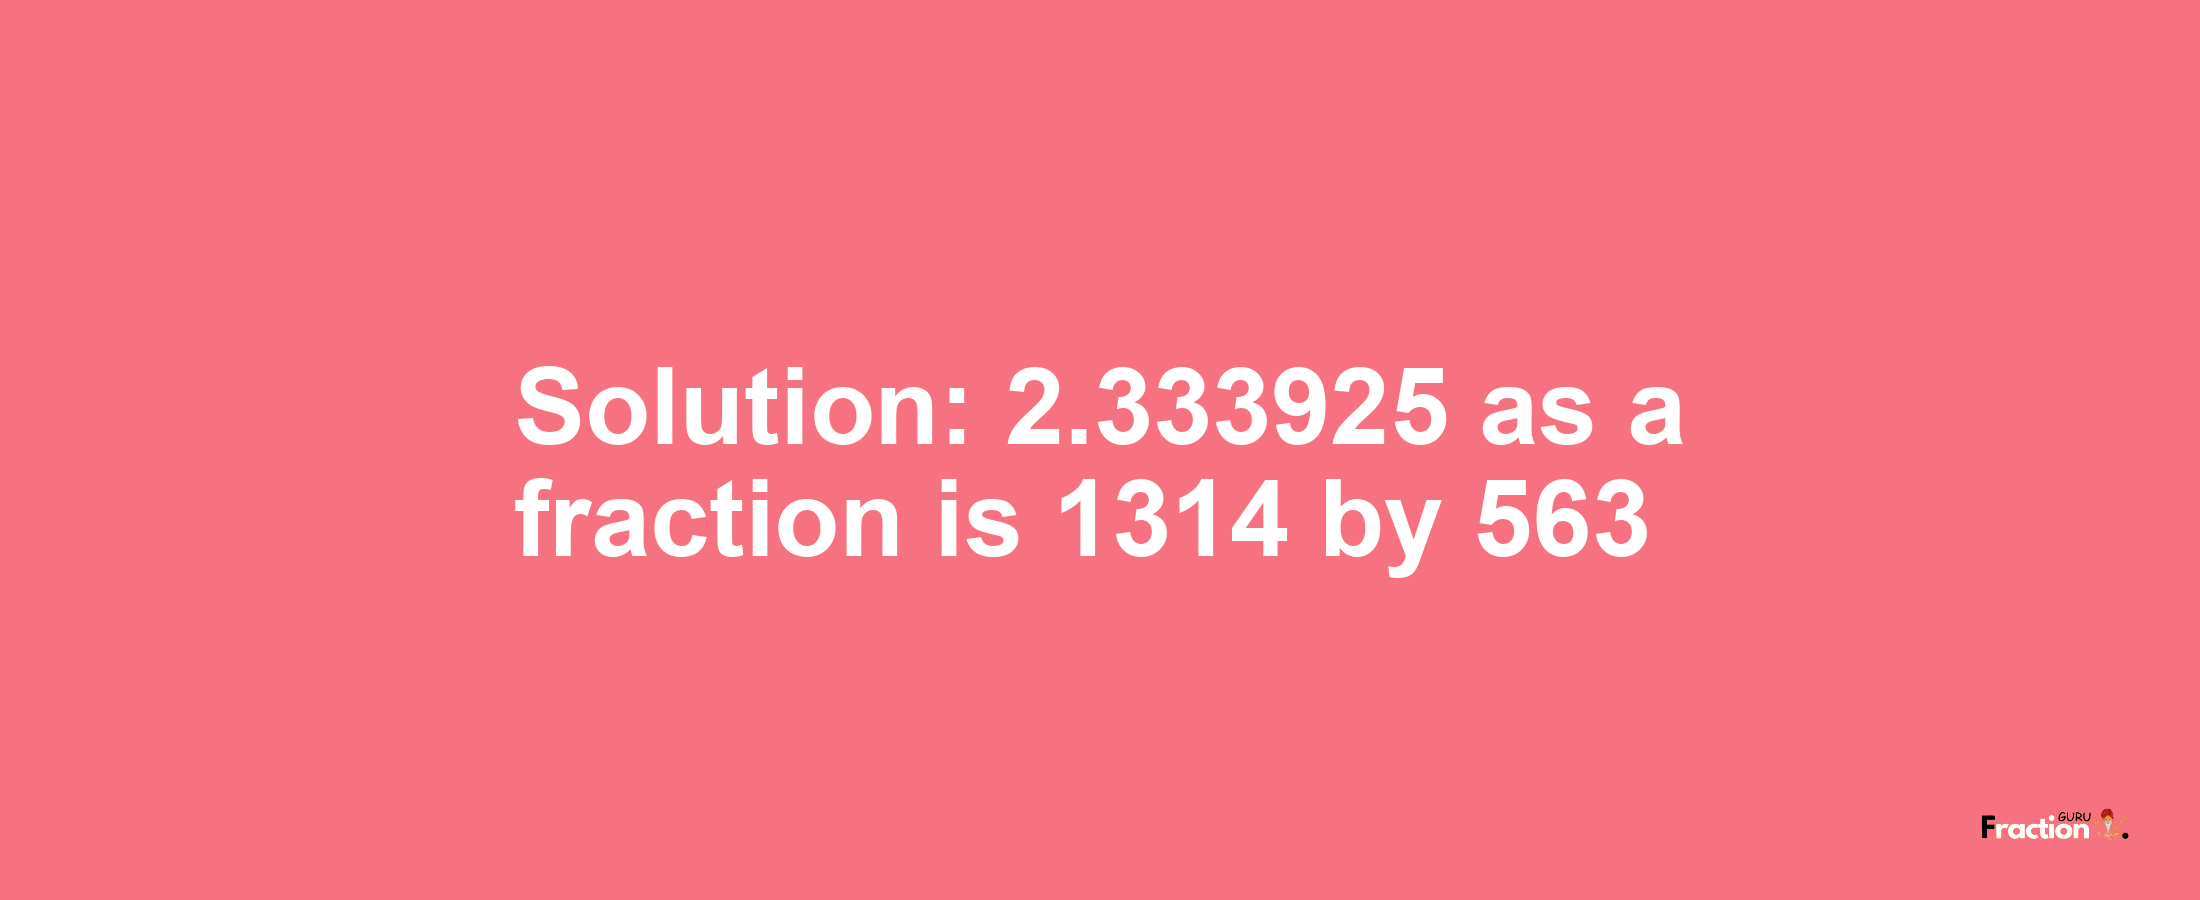 Solution:2.333925 as a fraction is 1314/563